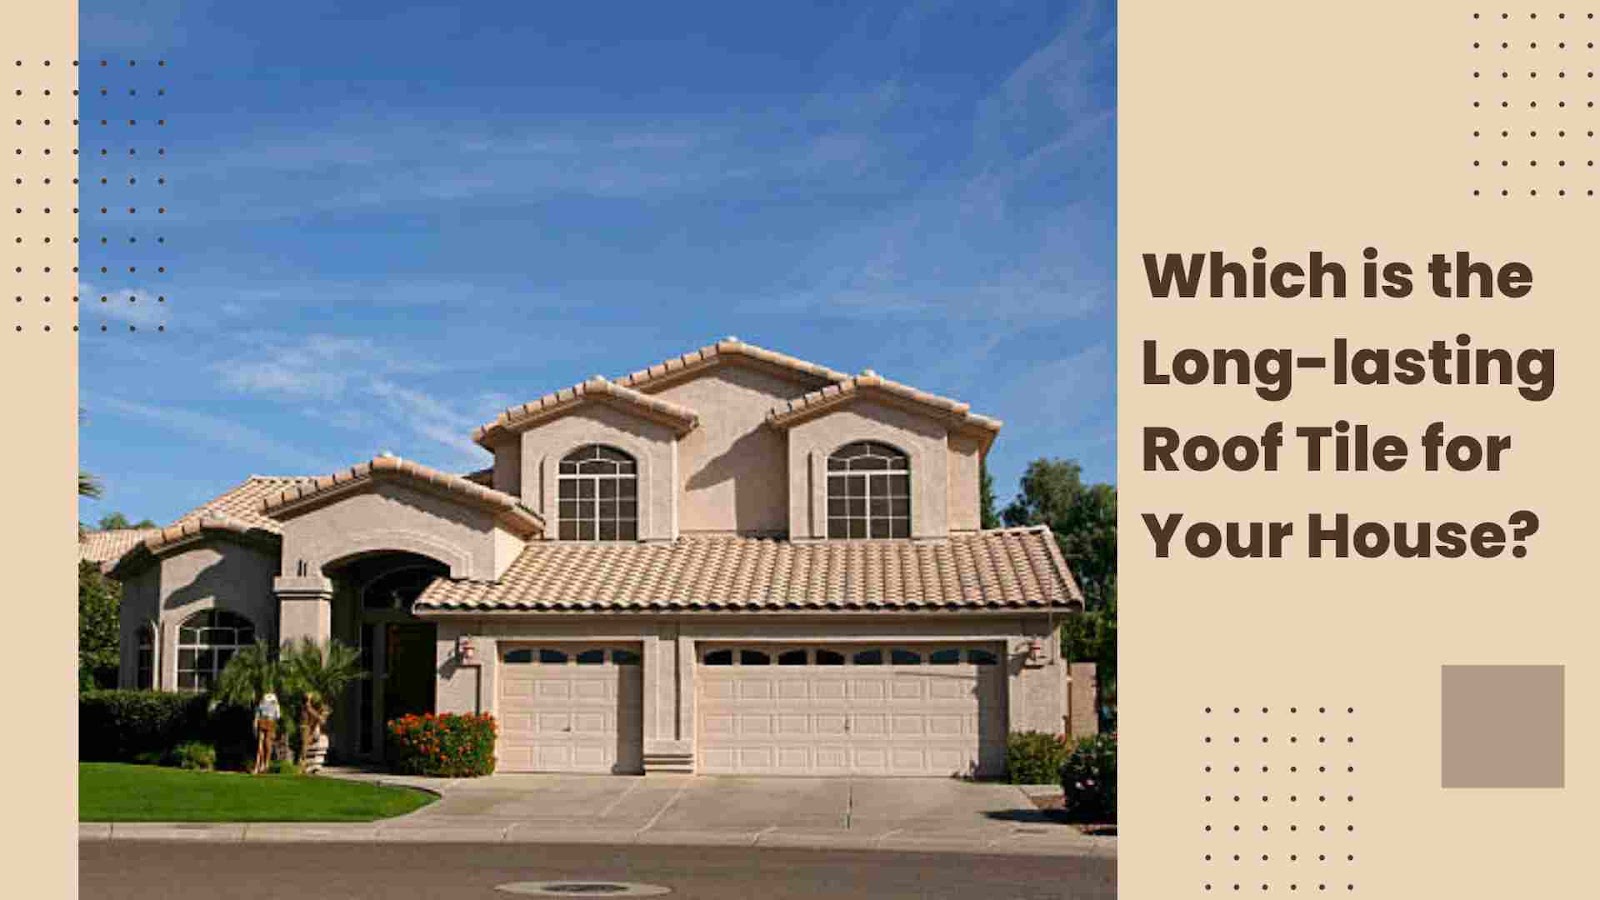 Which is the long-lasting roof tile for your house?